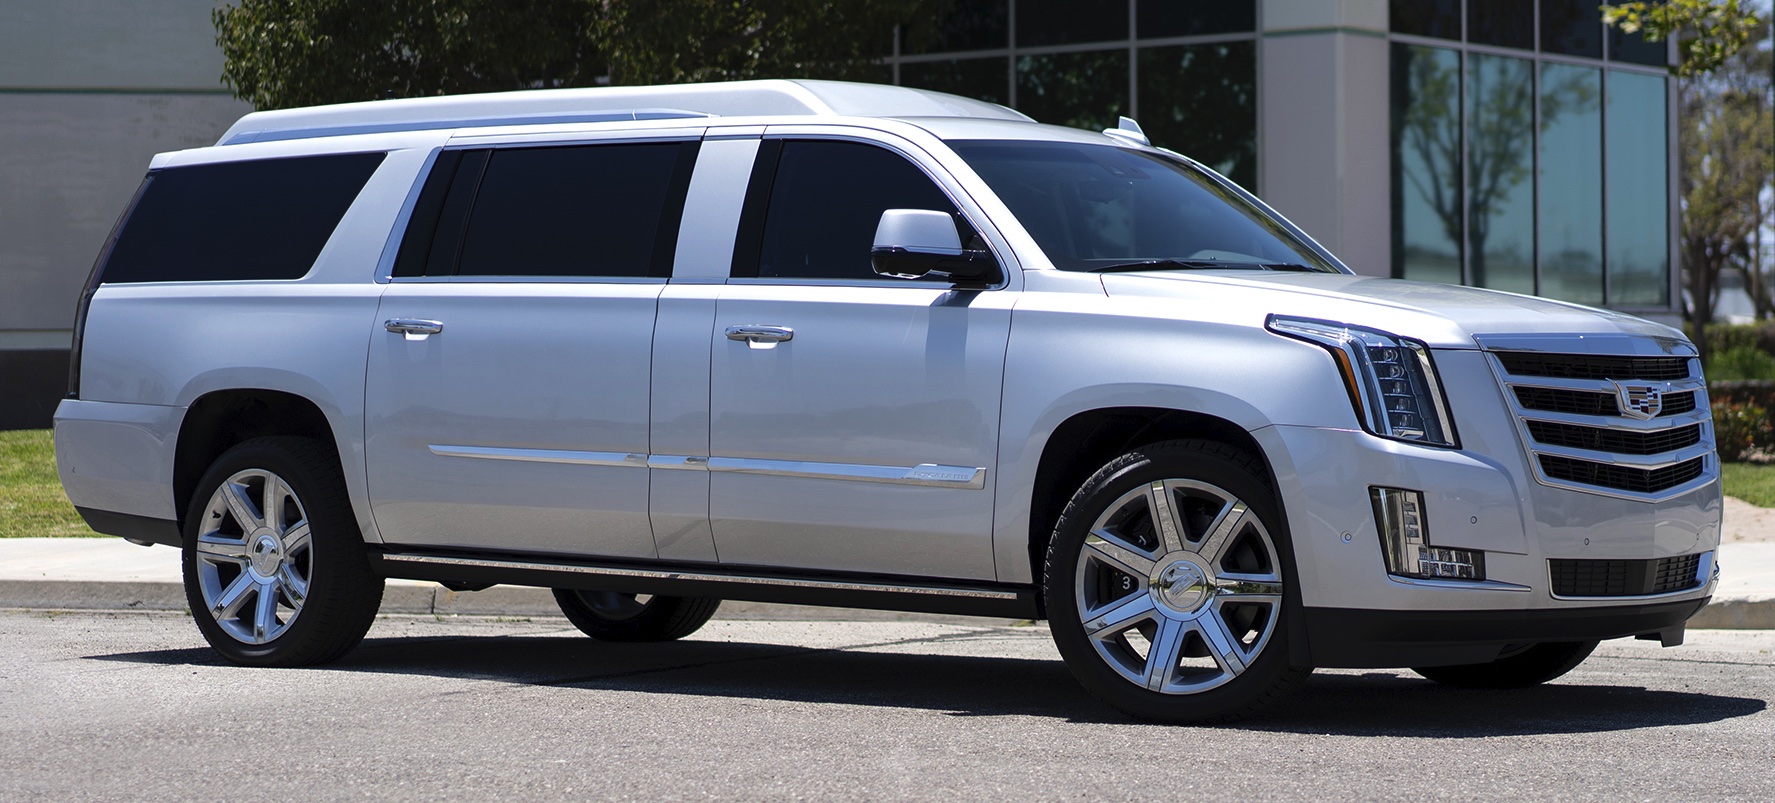 Tom Brady's extra long Cadillac Escalade, offered for sale